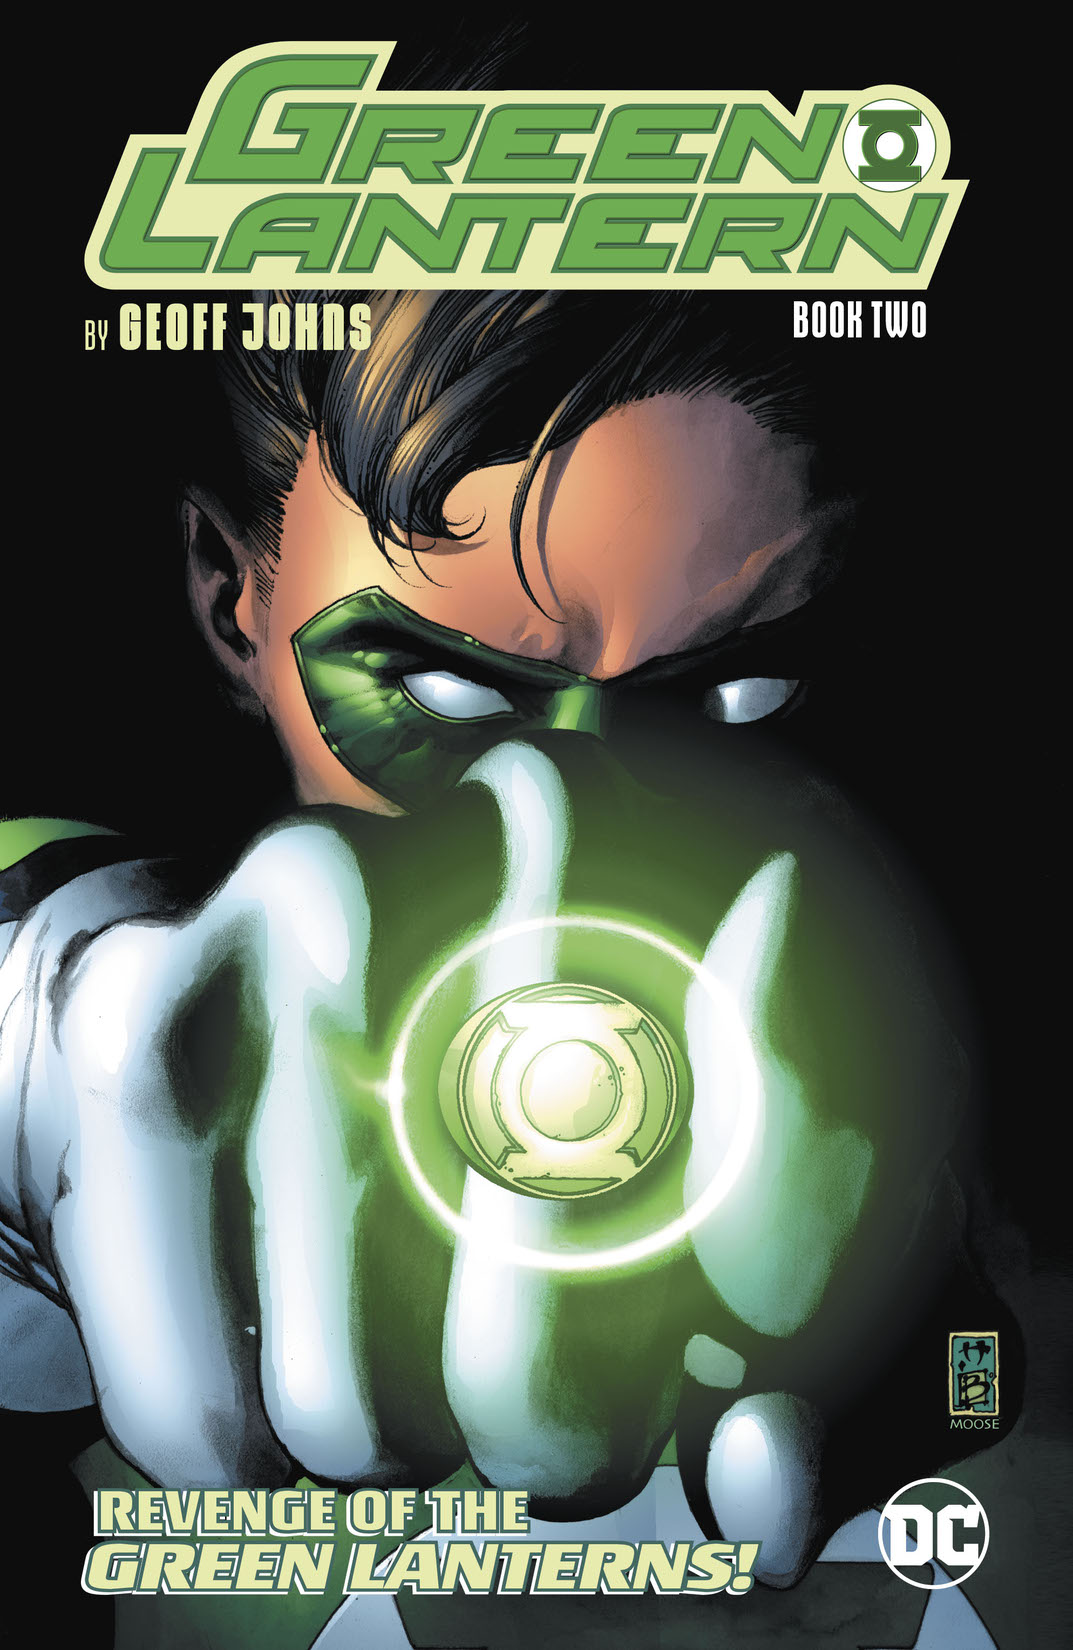 Green Lantern by Geoff Johns Book Two preview images